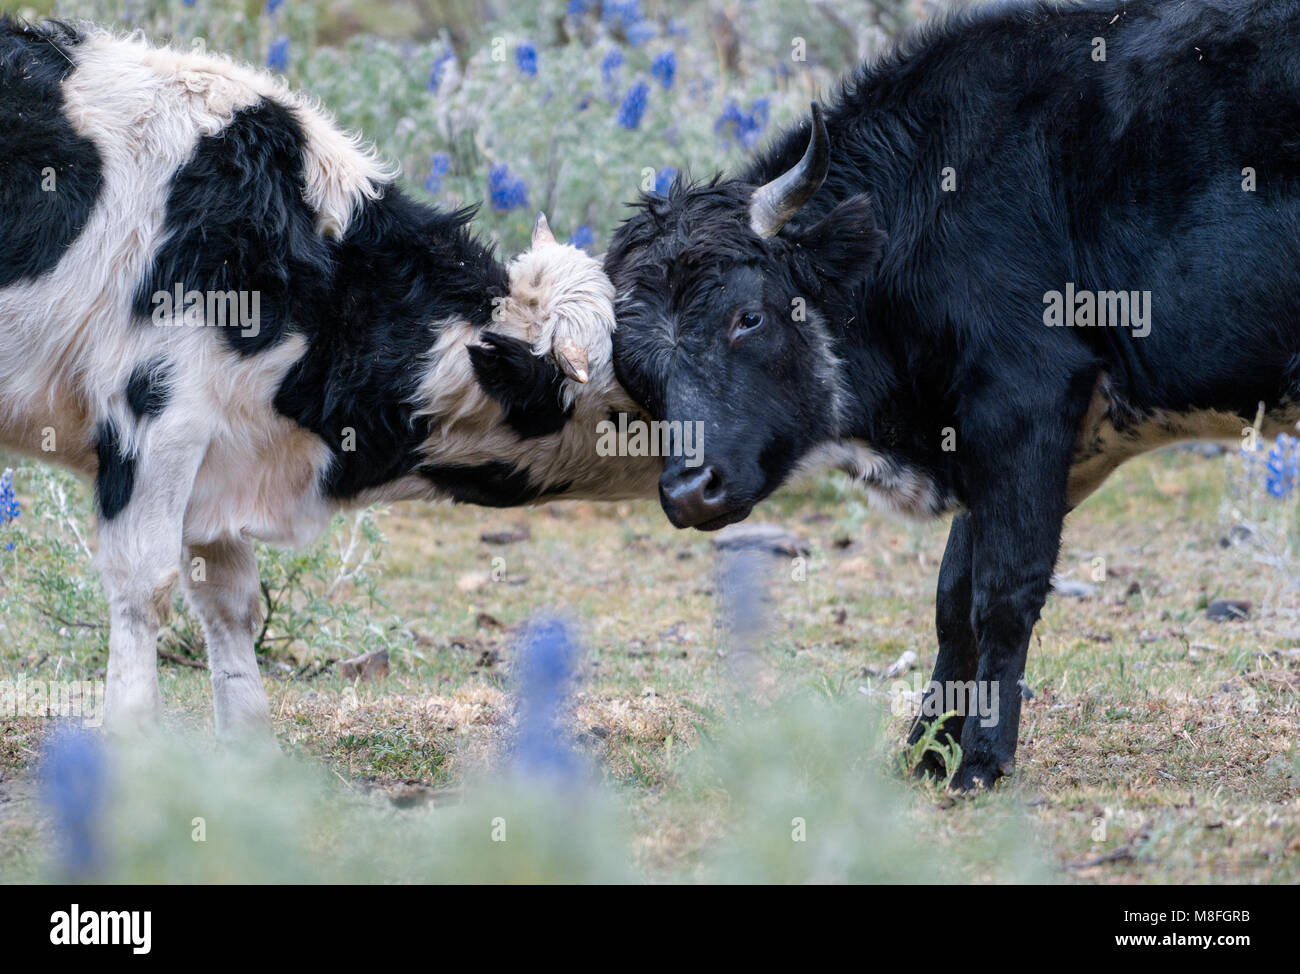 two young bulls fighting and playfully locking horns in midst of a green mountain meadow with blue wildflowers Stock Photo